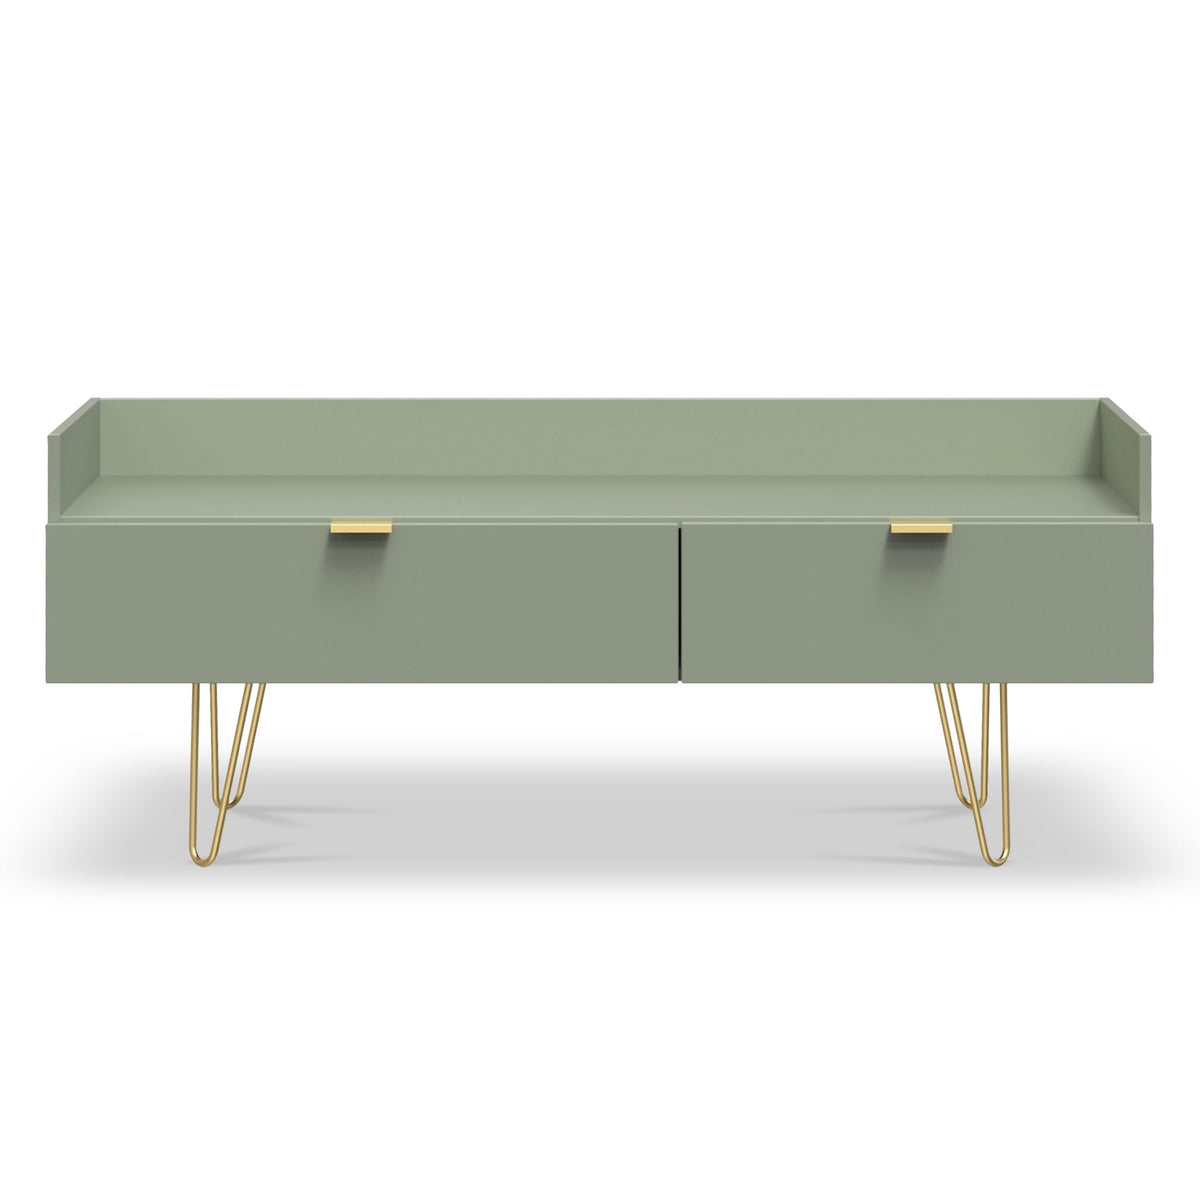 Moreno Olive Green 2 Drawer Media Console Unit with gold hairpin legs from Roseland Furniture